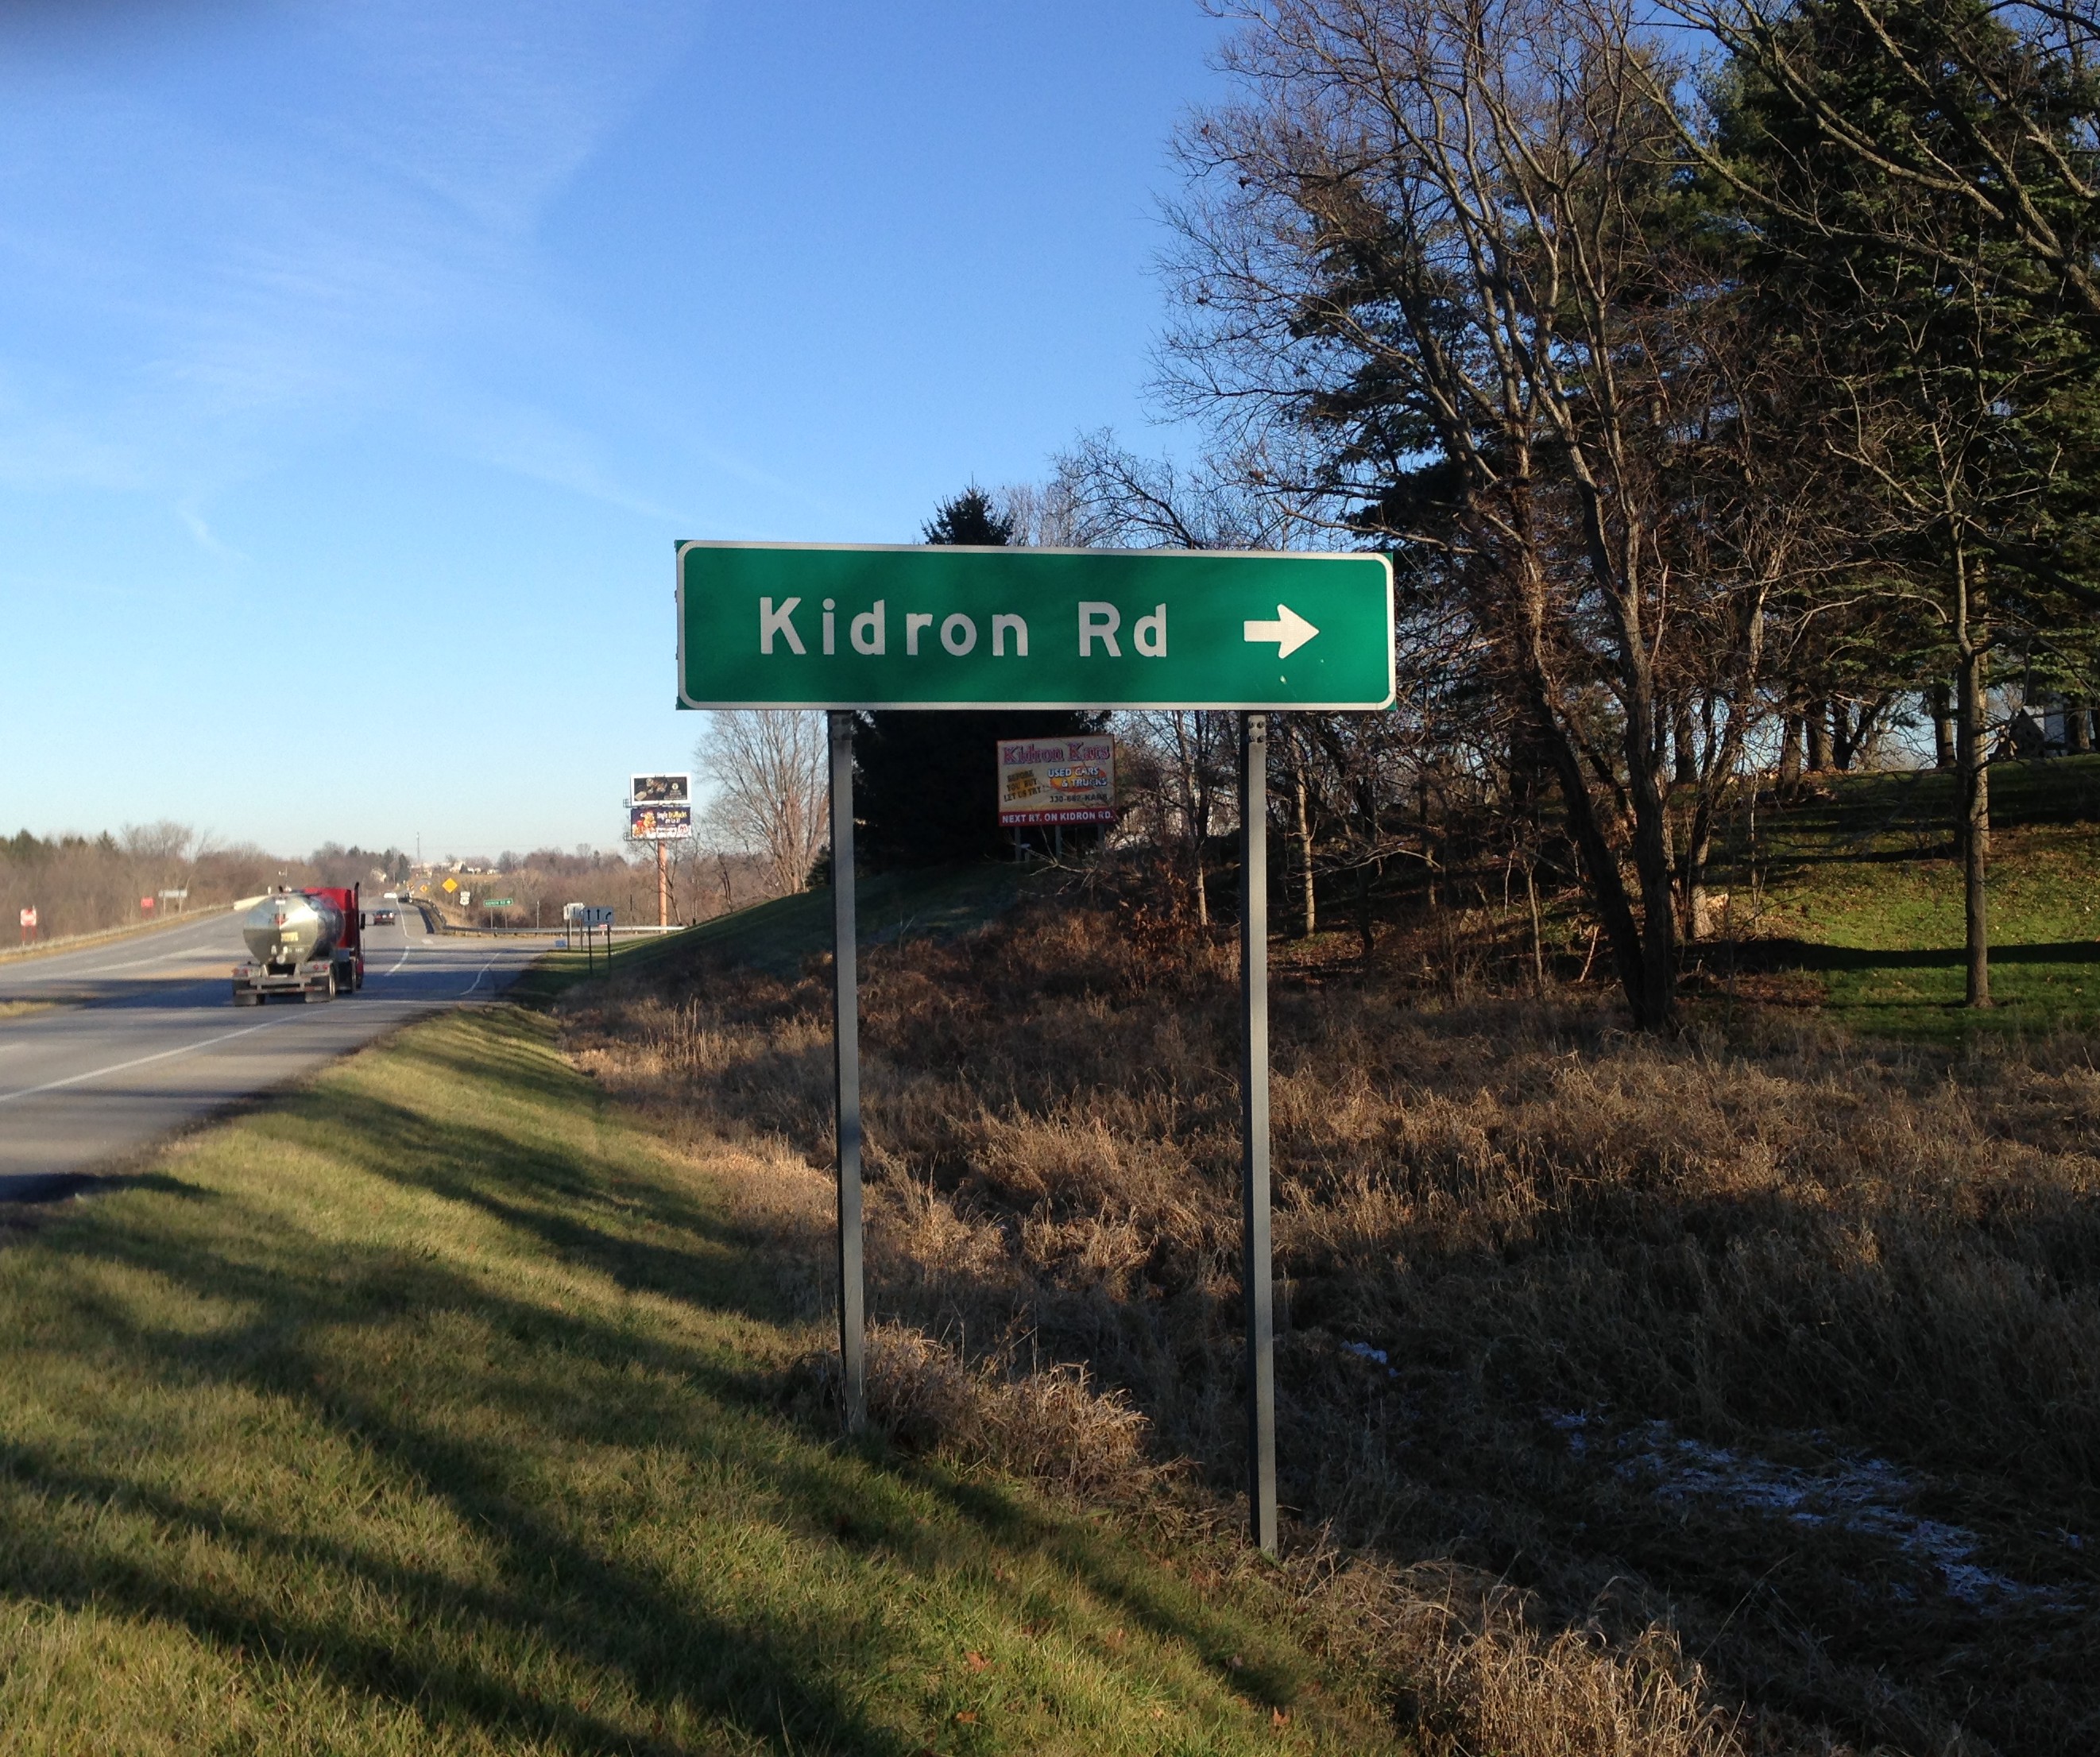 Going our way? Turn right off Ohio 30 to our Kidron store.